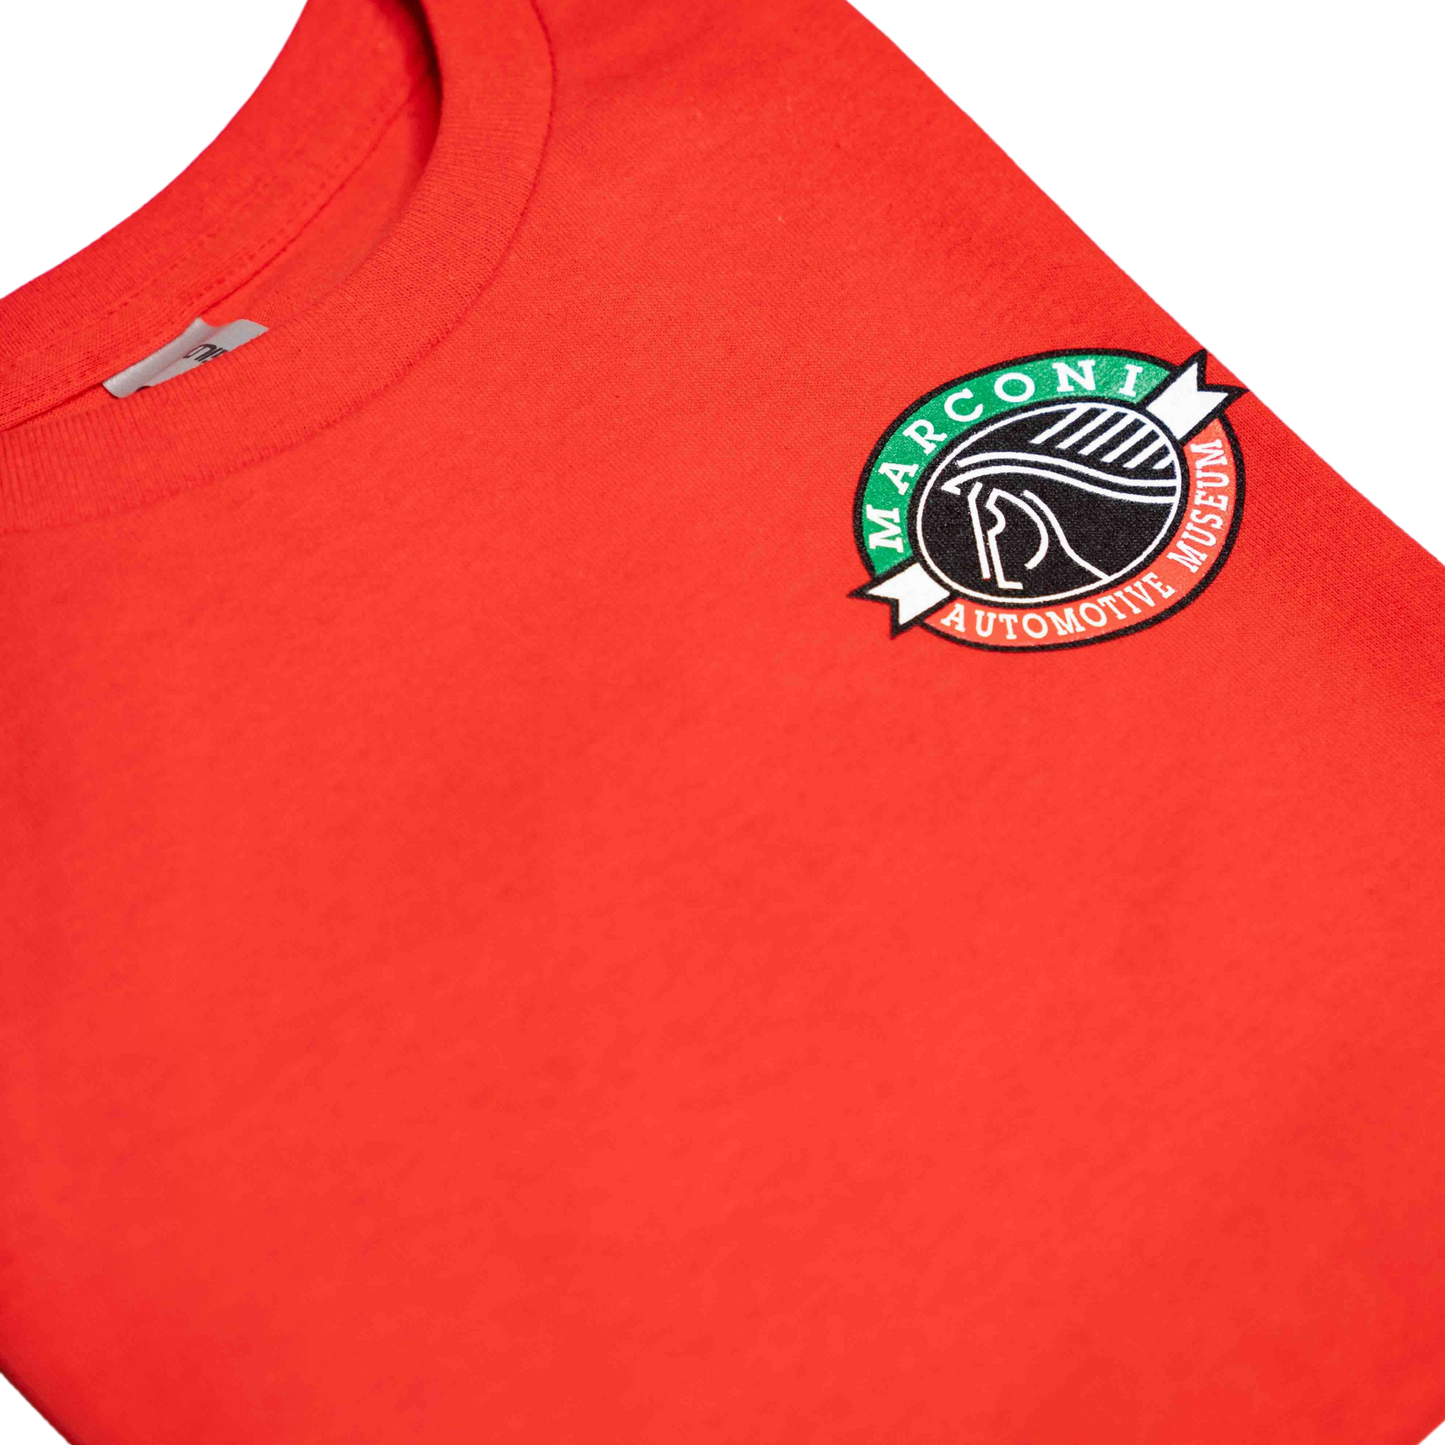 NEW - Marconi Museum Kids T-Shirt - Red